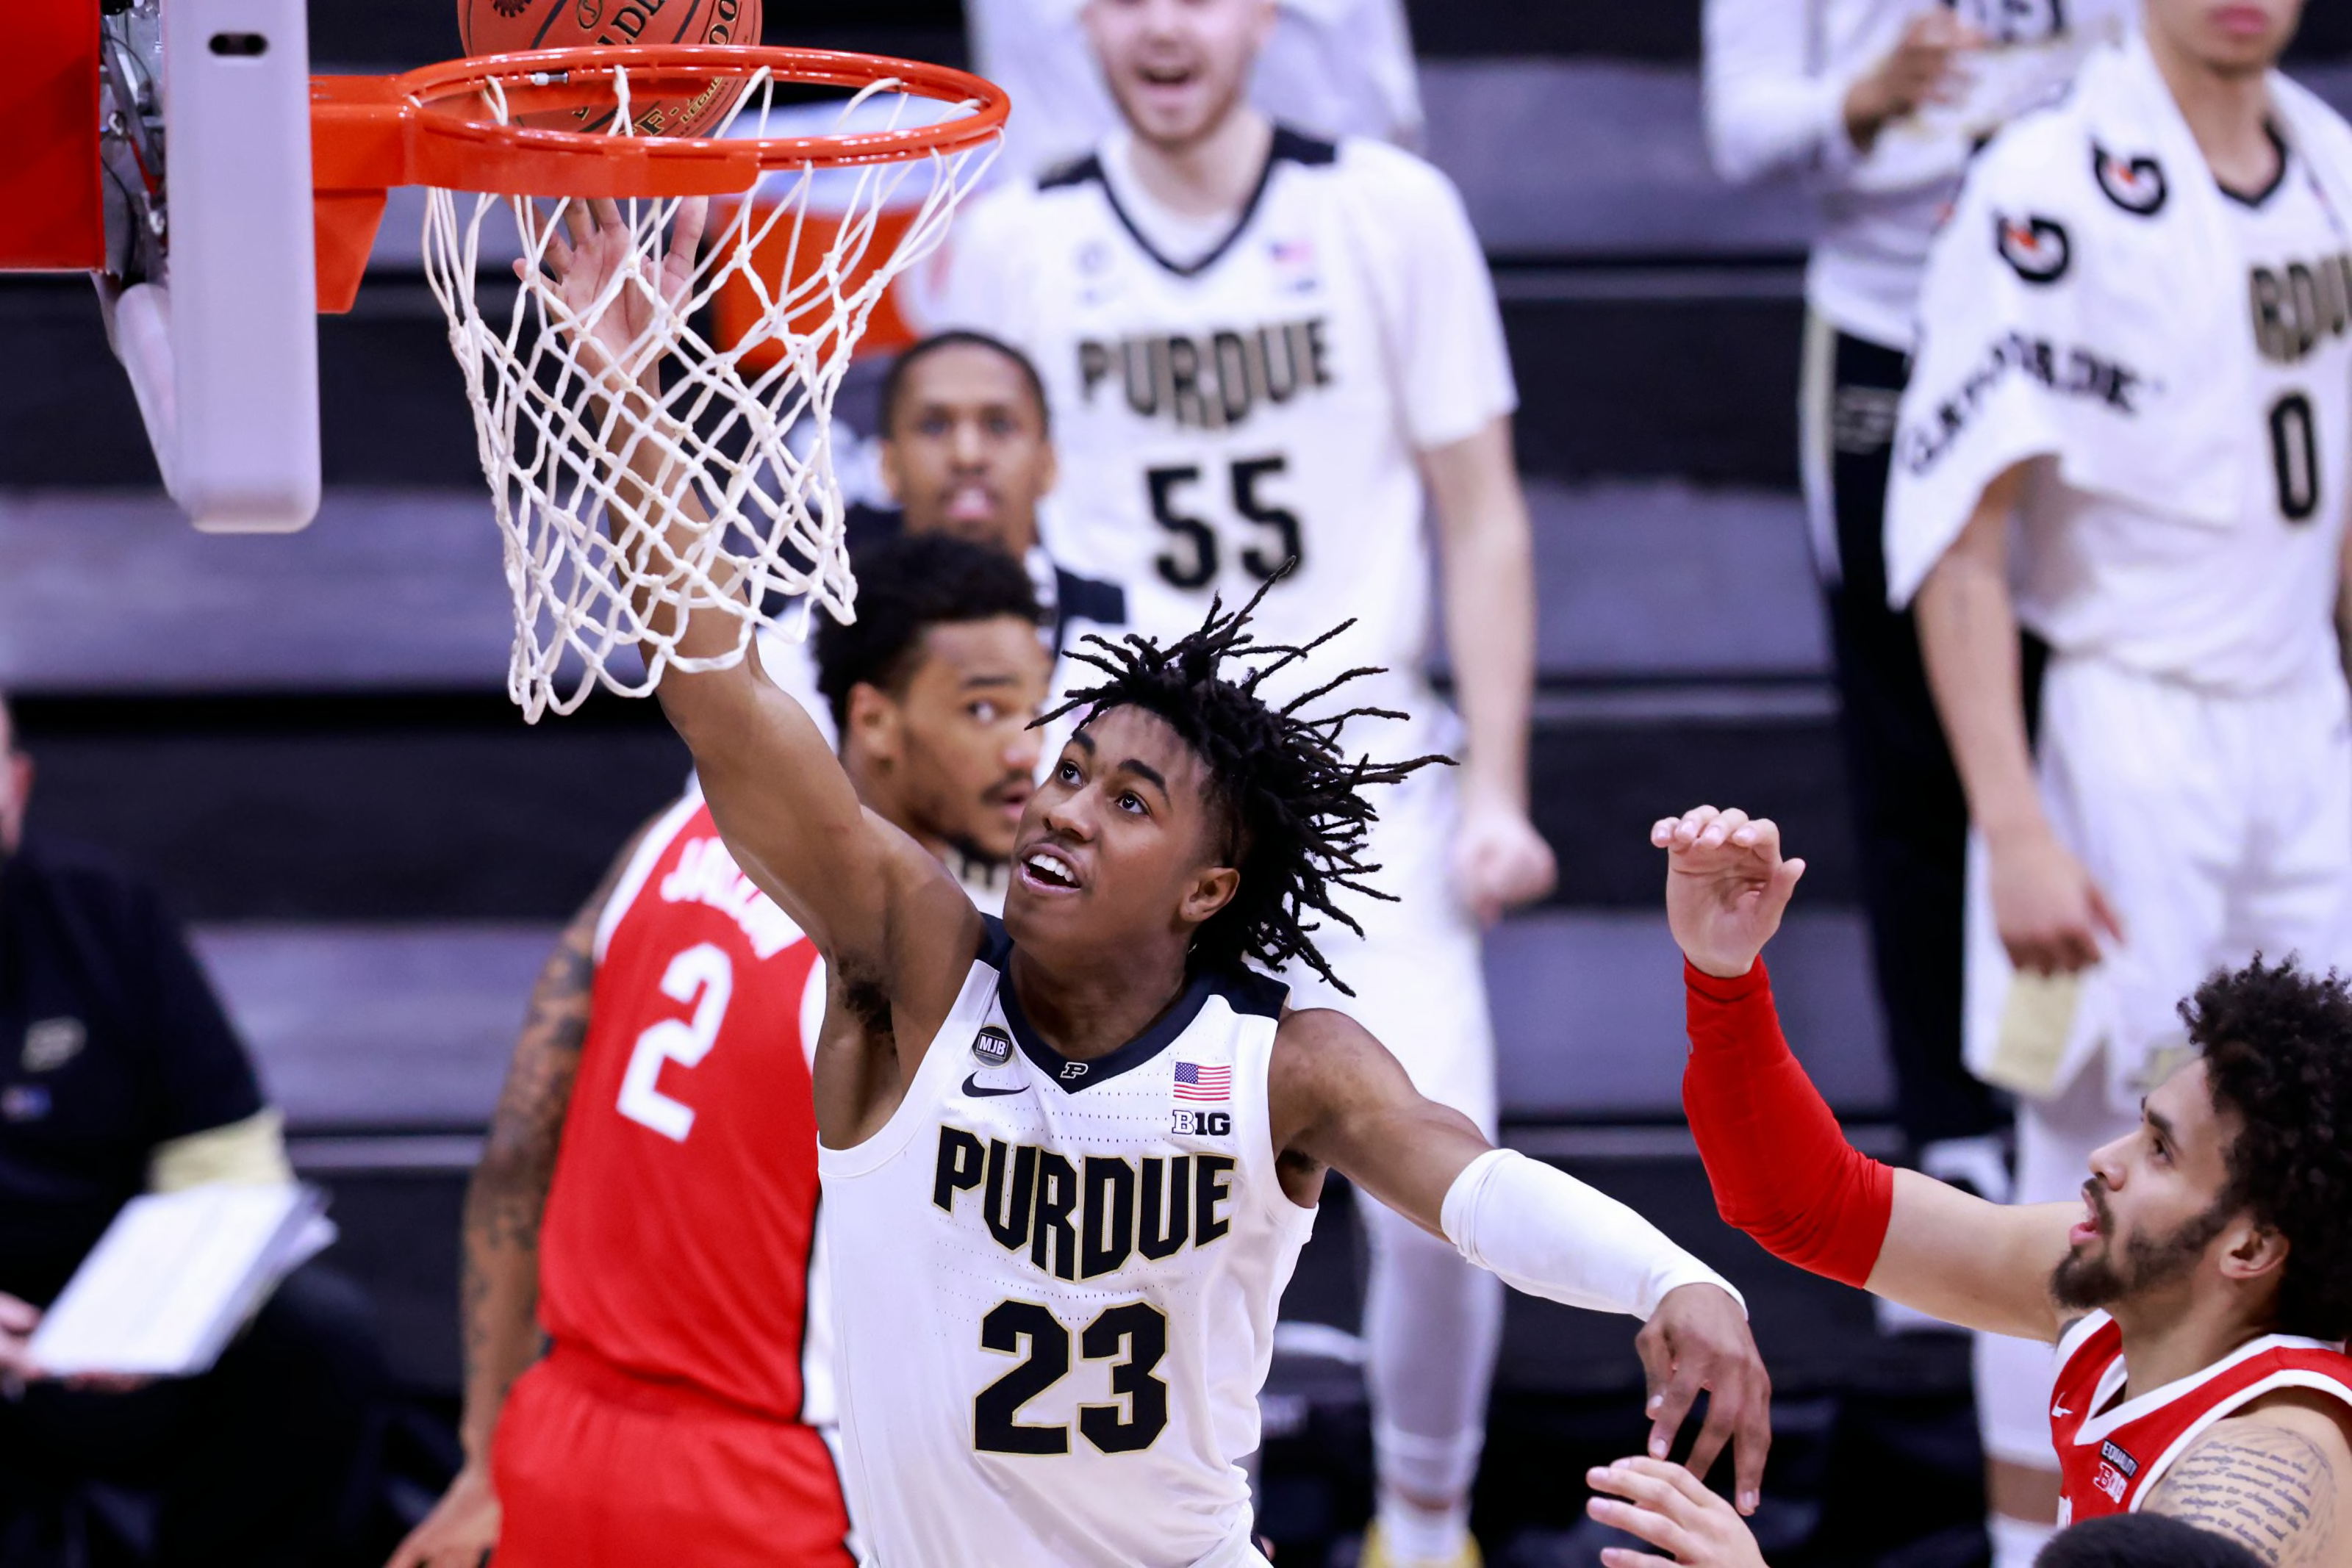 purdue-basketball-2021-22-season-preview-and-outlook-for-boilermakers